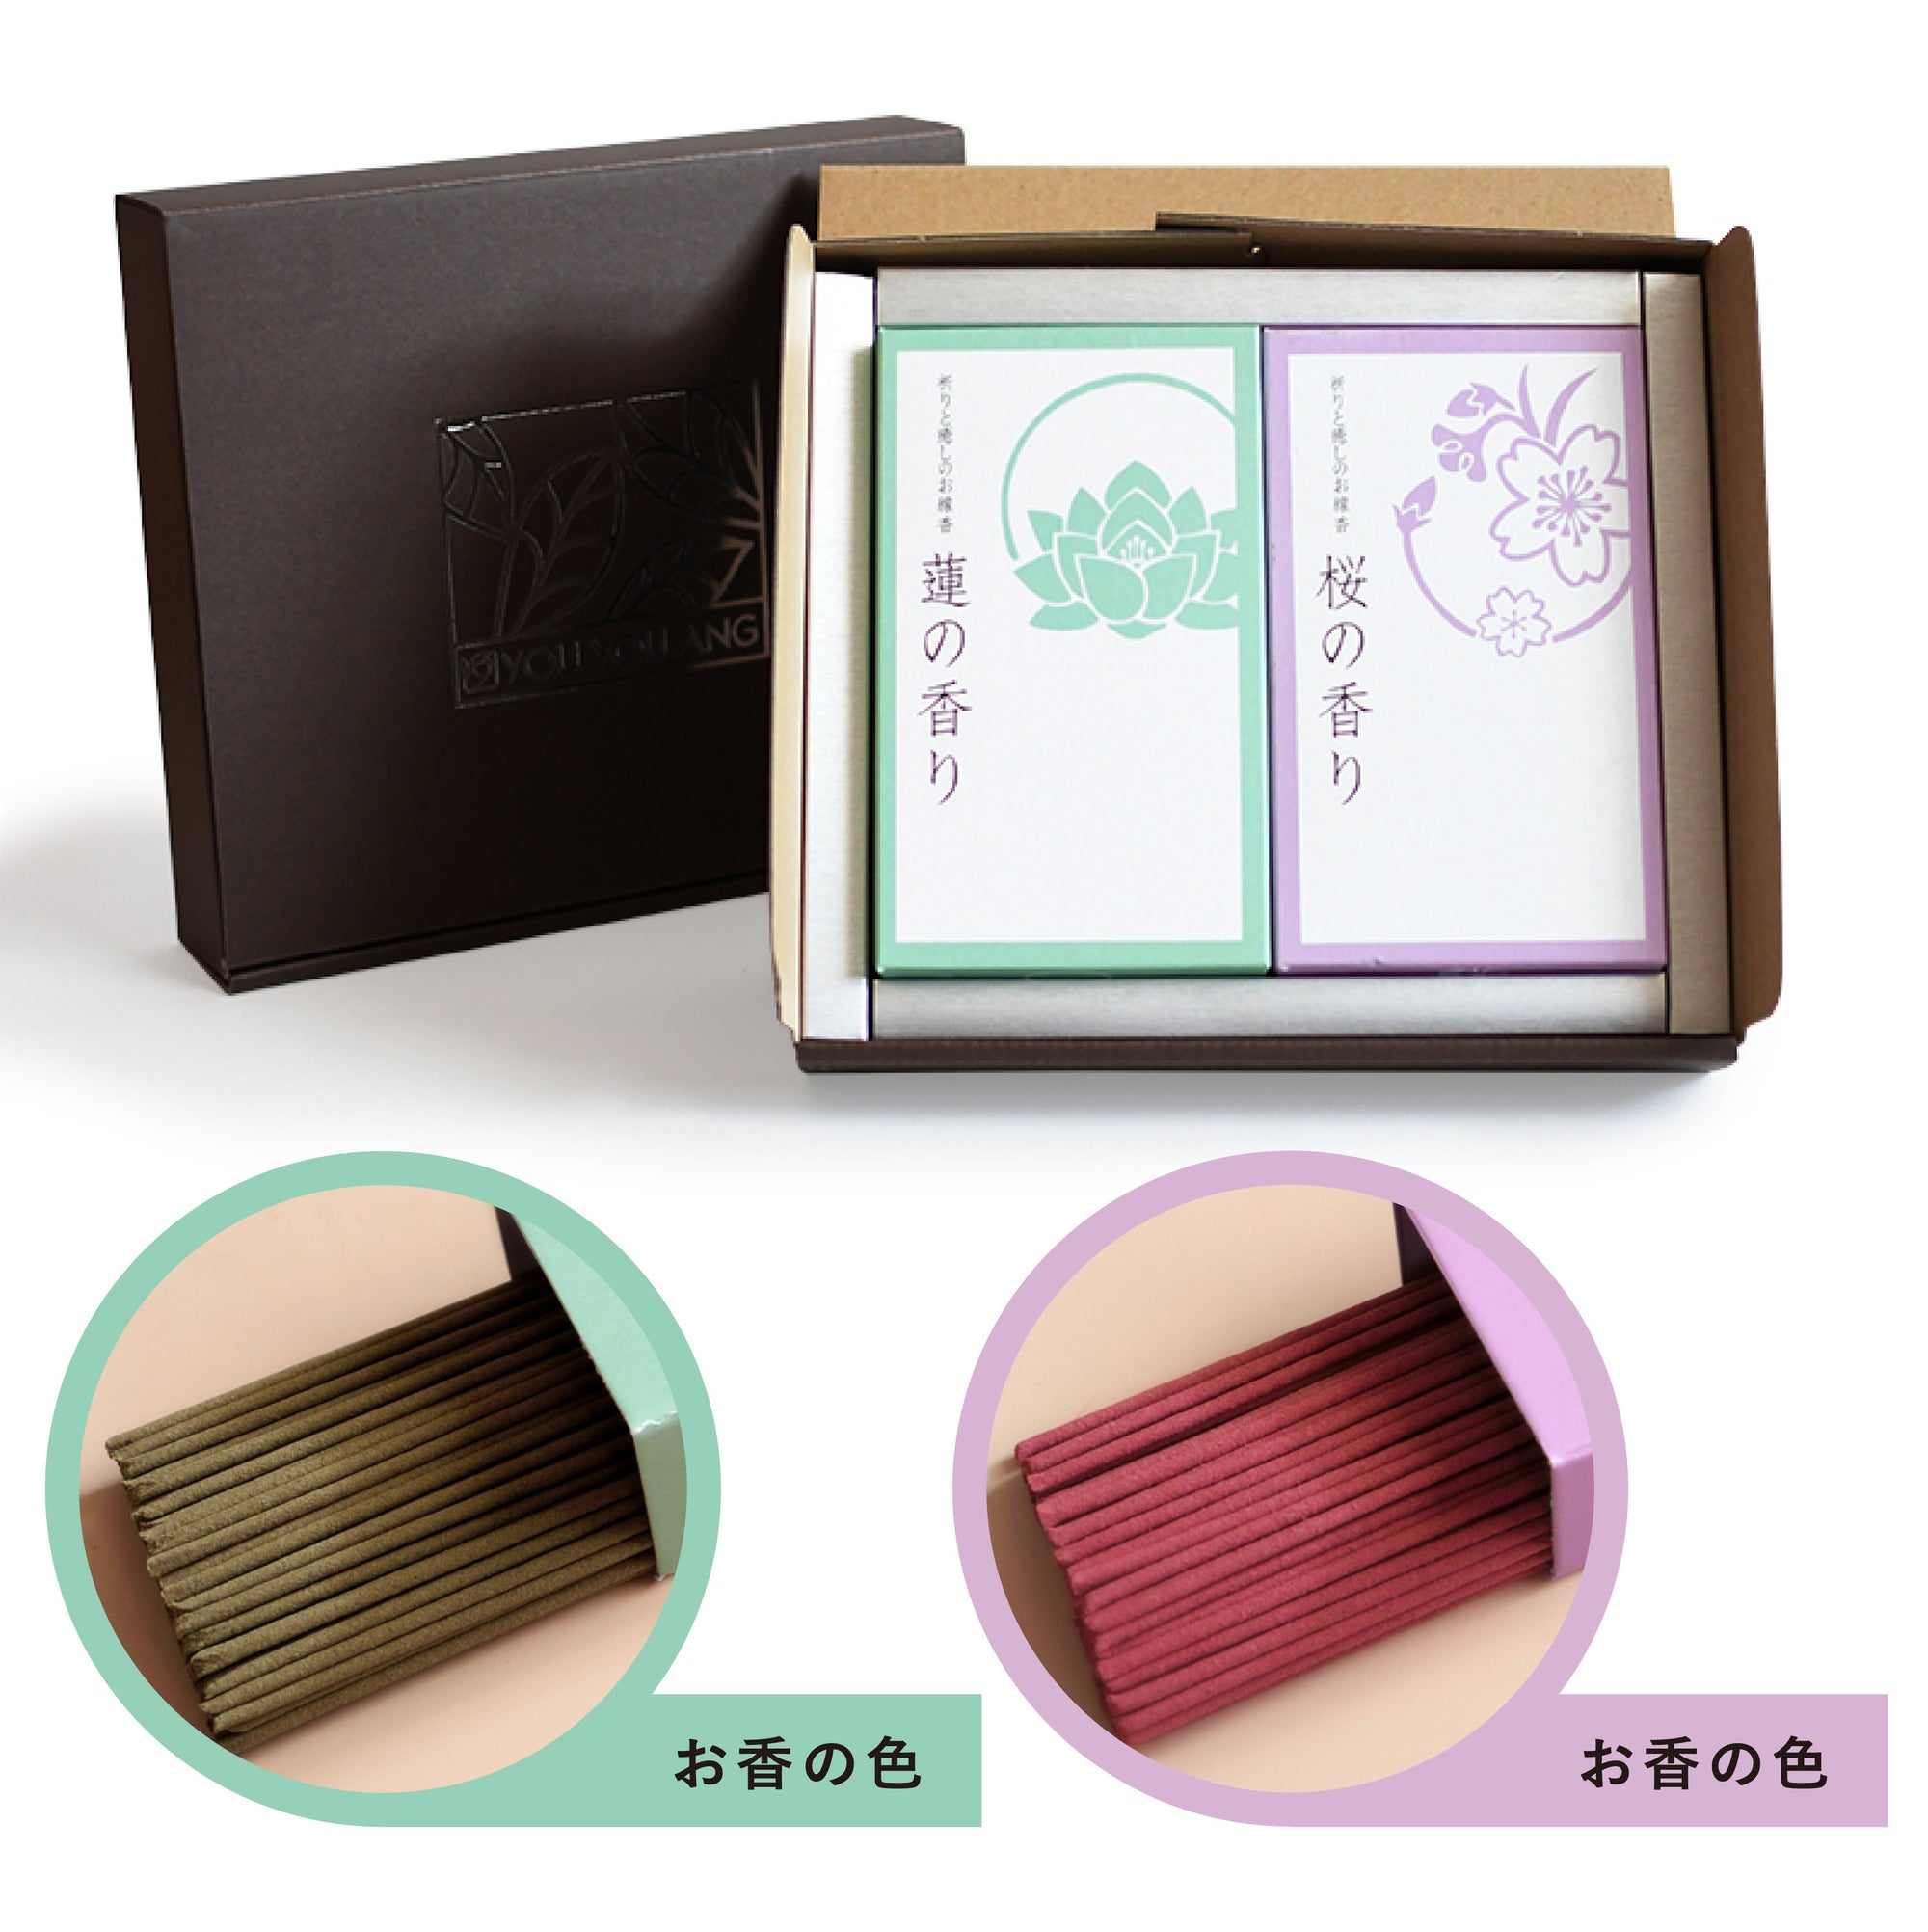 Incense for Healing / Value Box（Lotus,Cherry）